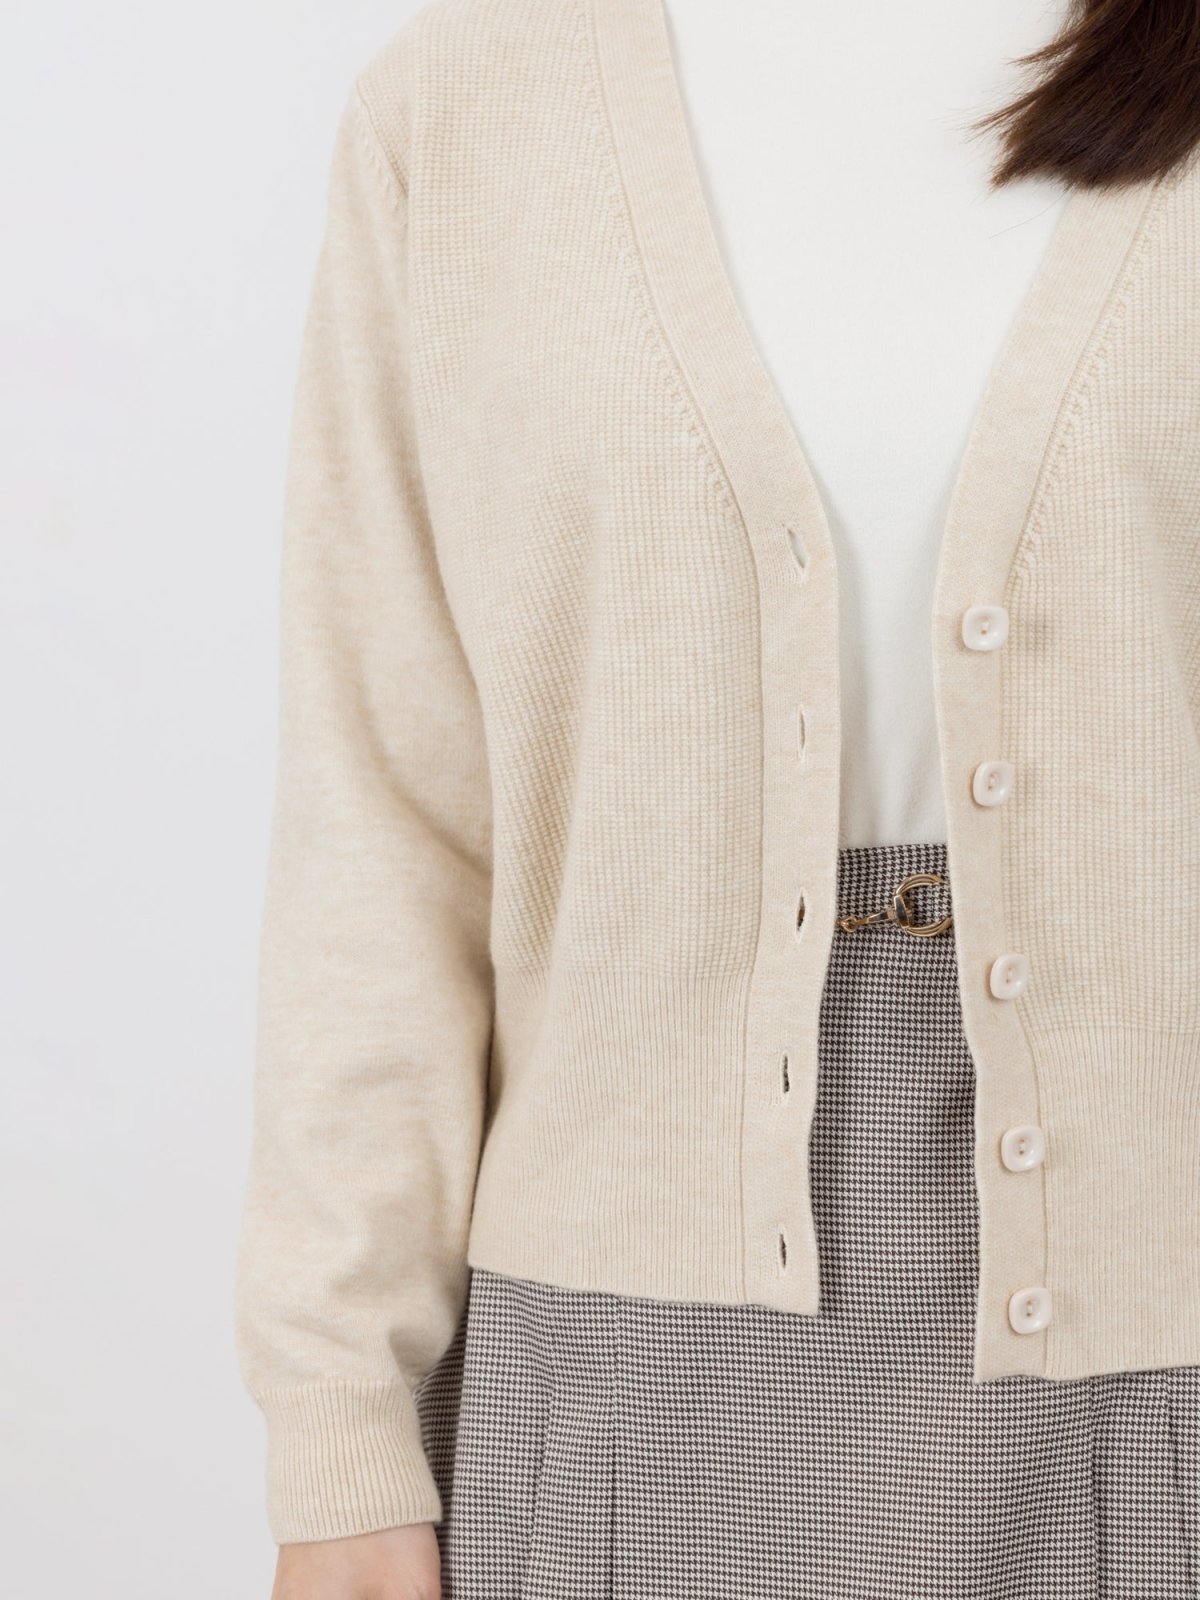 Quincy V-neck Knitted Cardigan - DAG-G-9639-22AlmondF - Almond Cream - F - D'ZAGE Designs